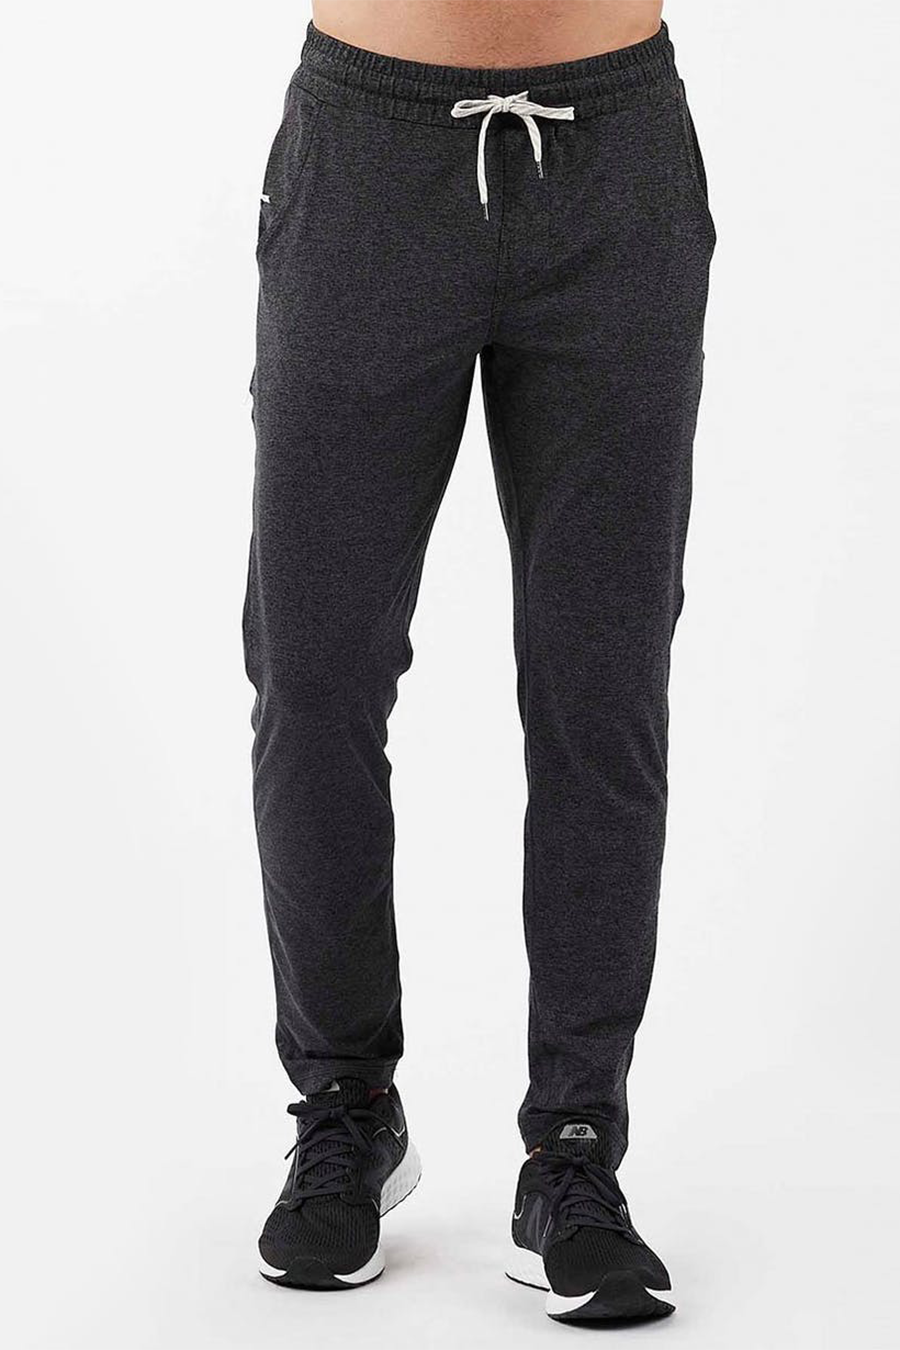 Ponto Performance Pant | Charcoal Heather - Main Image Number 1 of 1